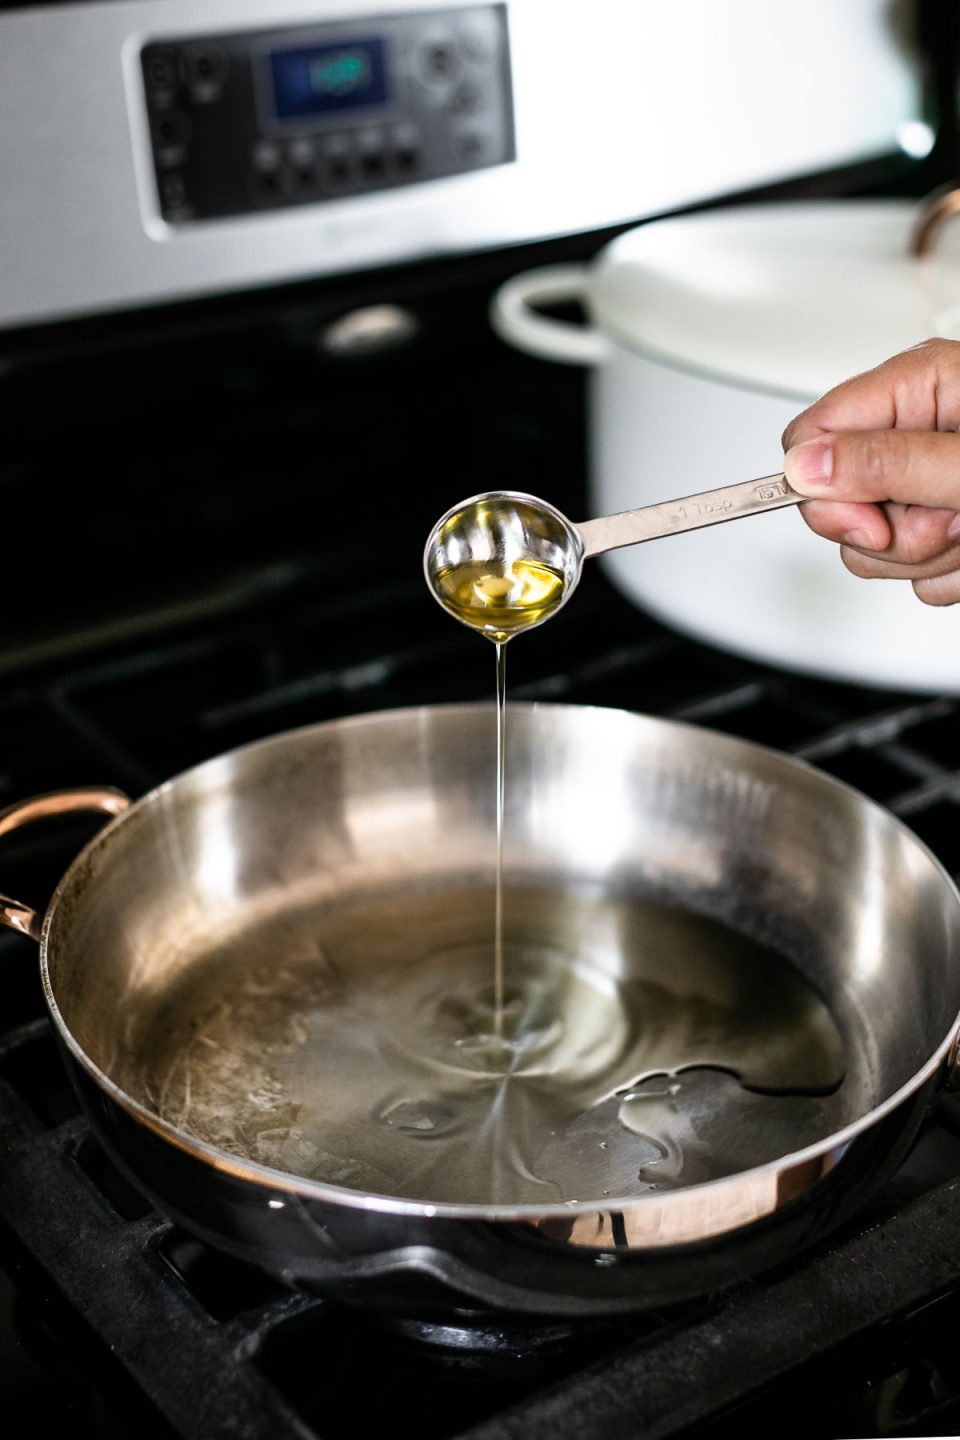 How to sear scallops, Step 1 – A woman's hand shown pouring oil into a stainless steel skillet from a tablespoon measure. The skillet sits atop a gas range with a white Dutch oven in the background.